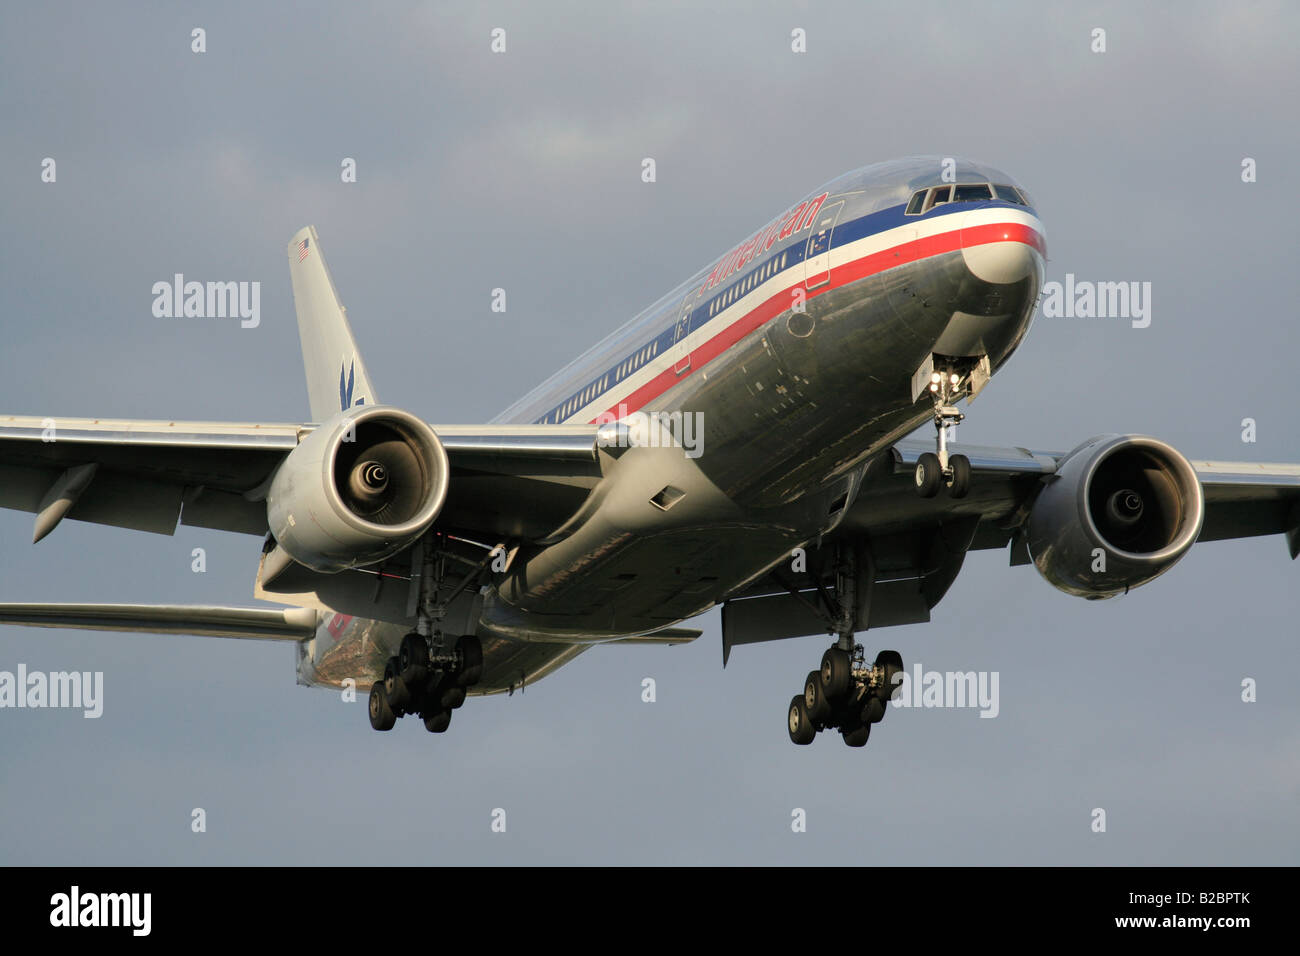 American Airlines Boeing 777-200ER on approach Stock Photo